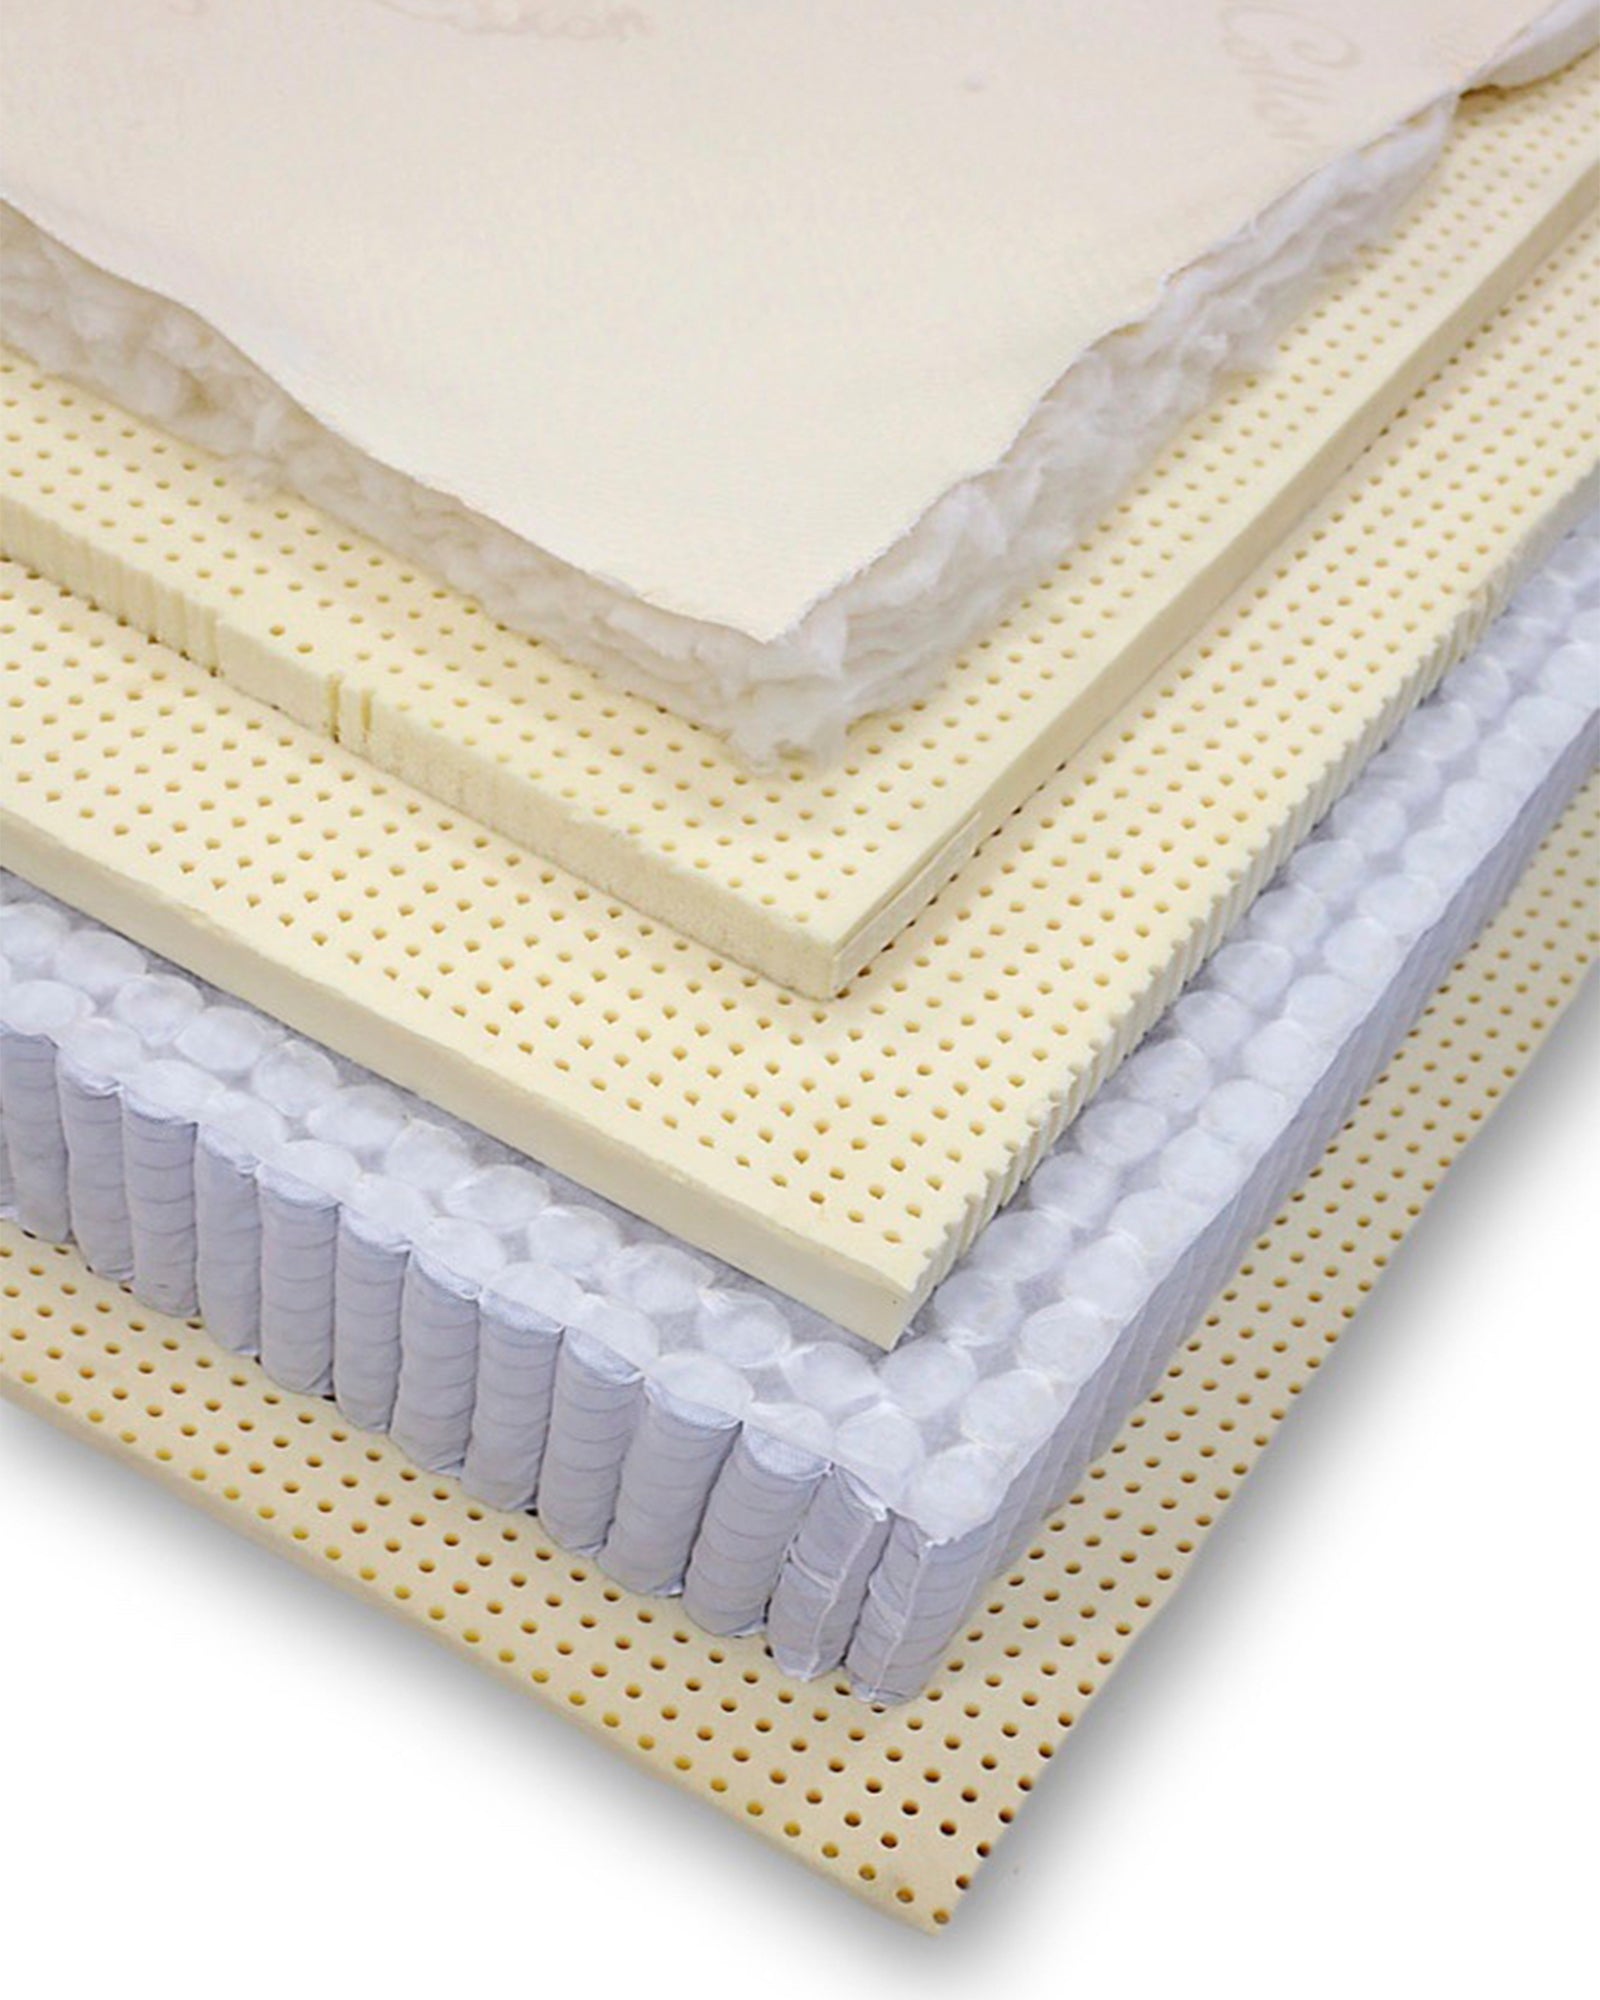 Interior Components Of Harvest Pillow Top Mattress Showing Detailed Layers Of Organic Latex, Cotton and Wool